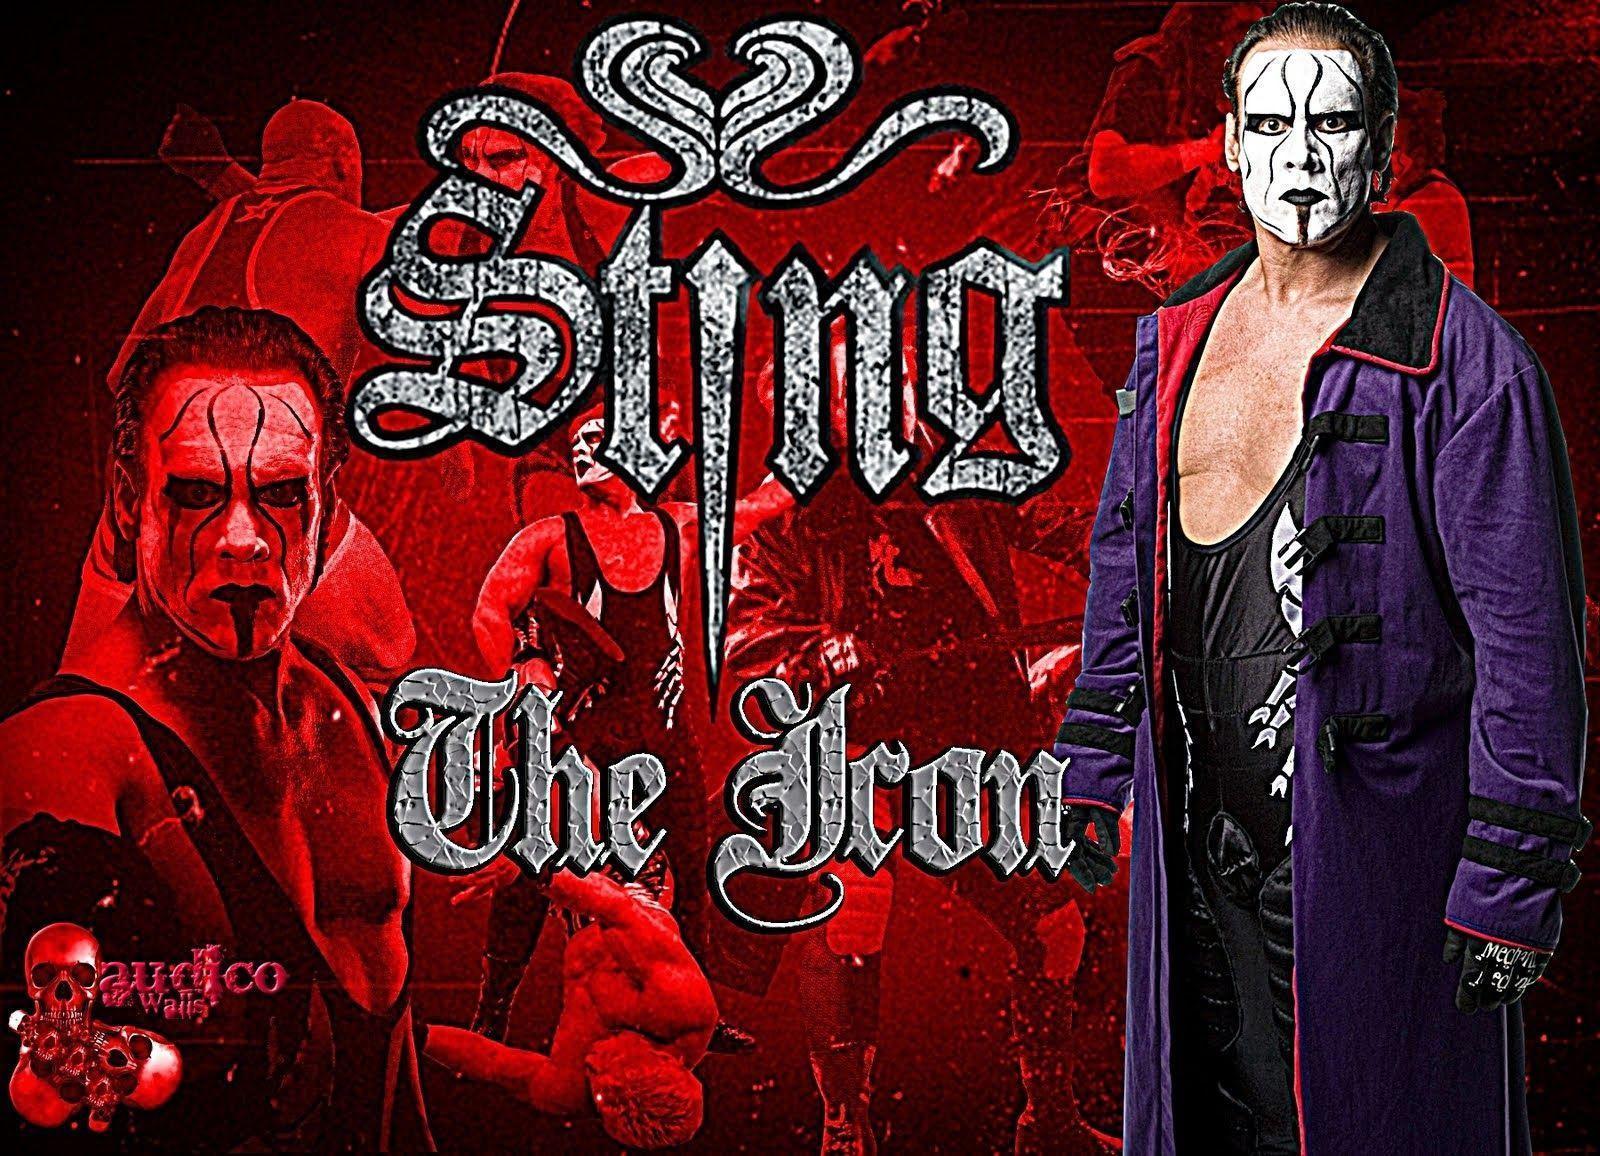 Sting Hd Wallpapers Free Download - Wwe Sting Photos Download , HD Wallpaper & Backgrounds